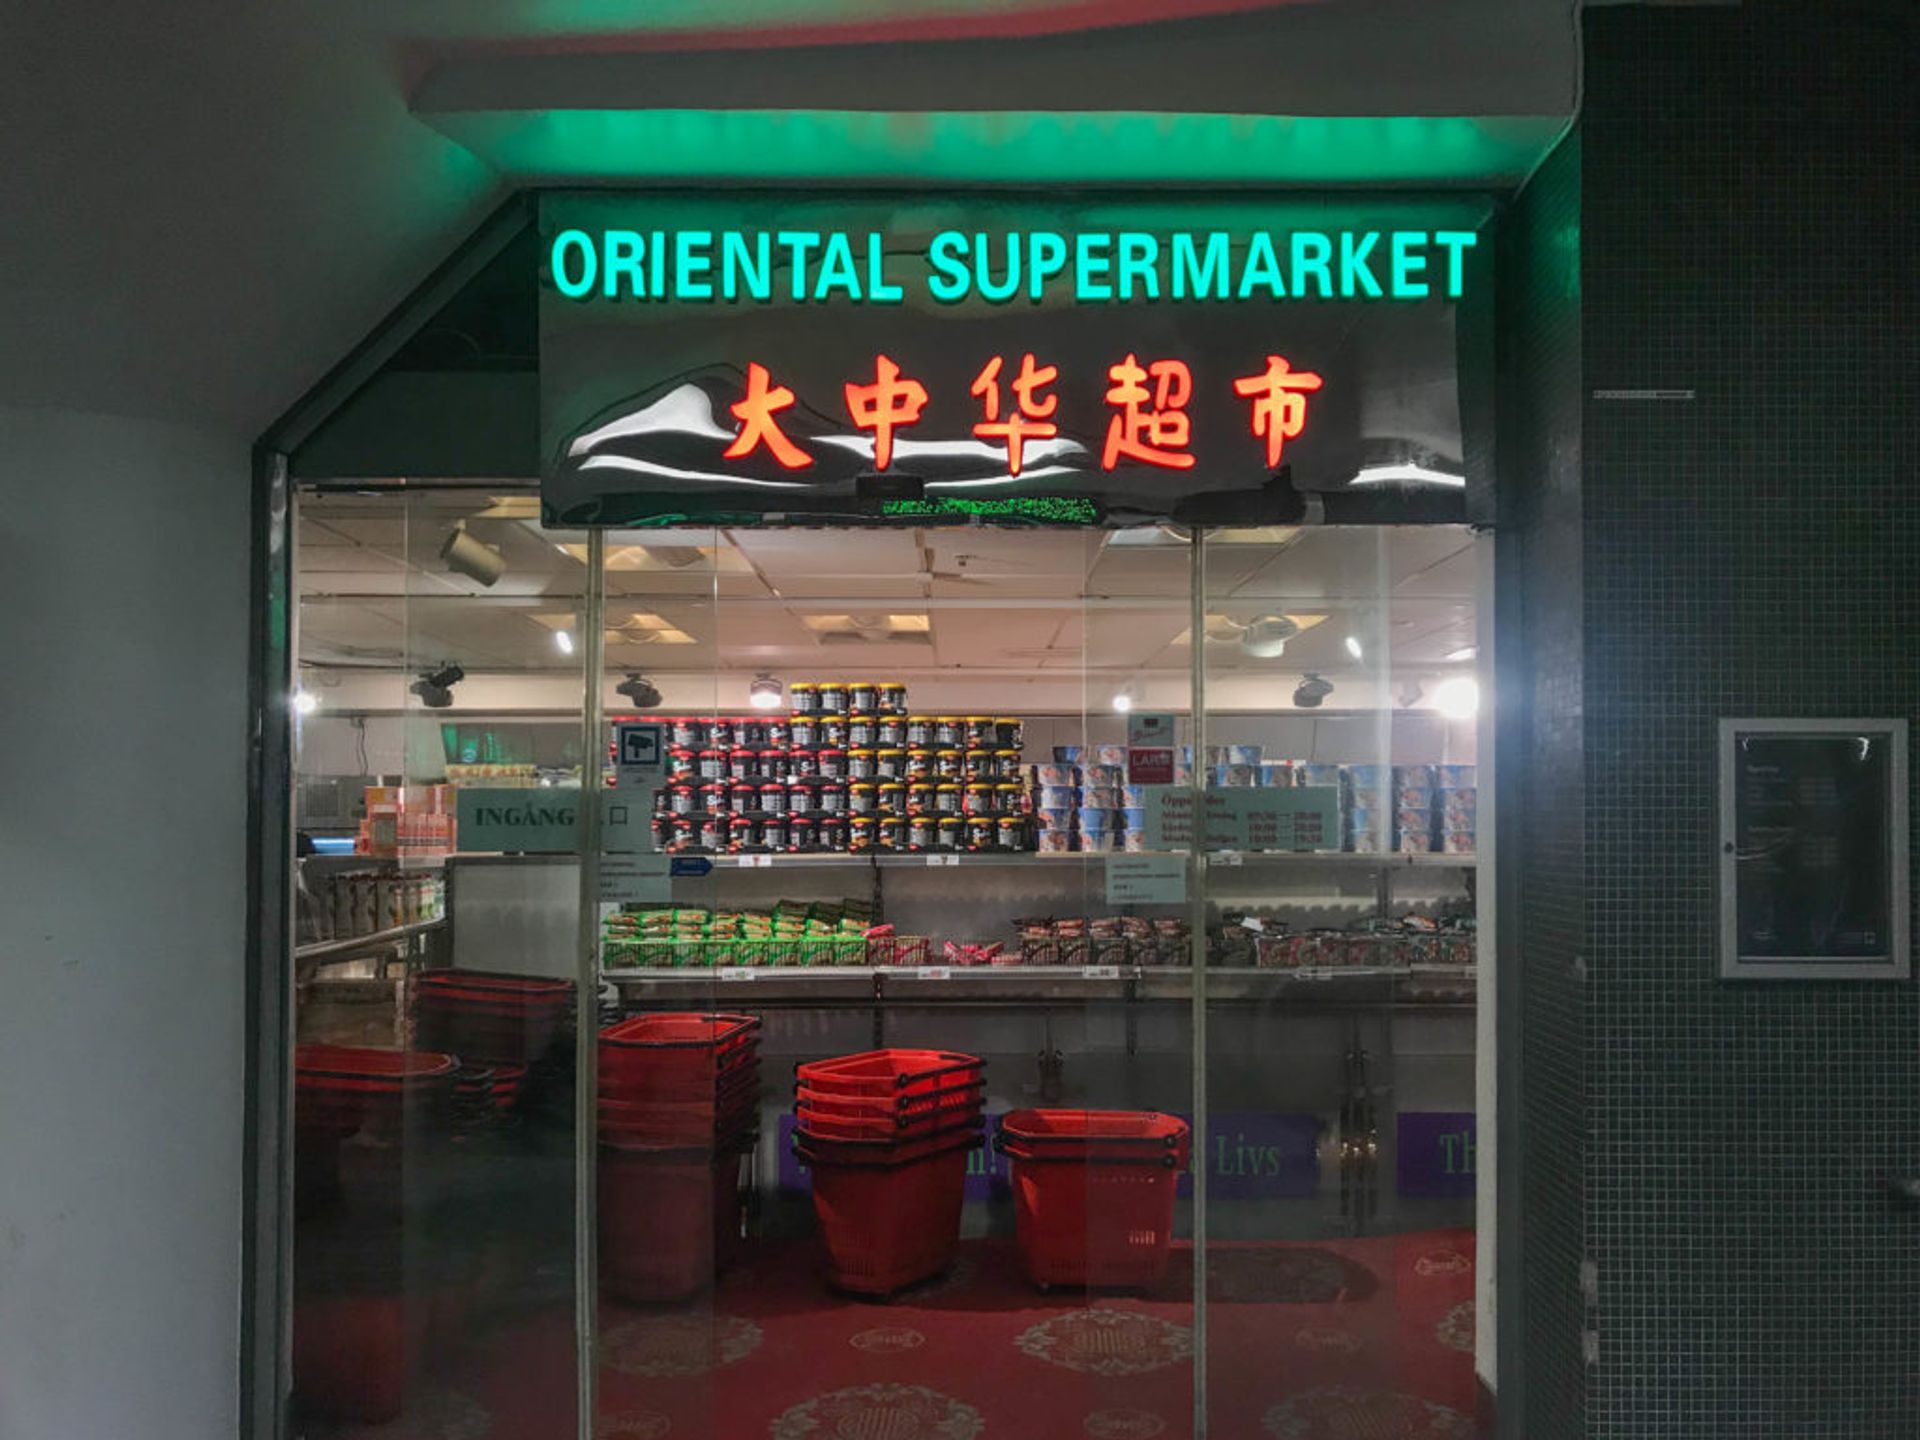 Entrance to the Oriental Supermarket.